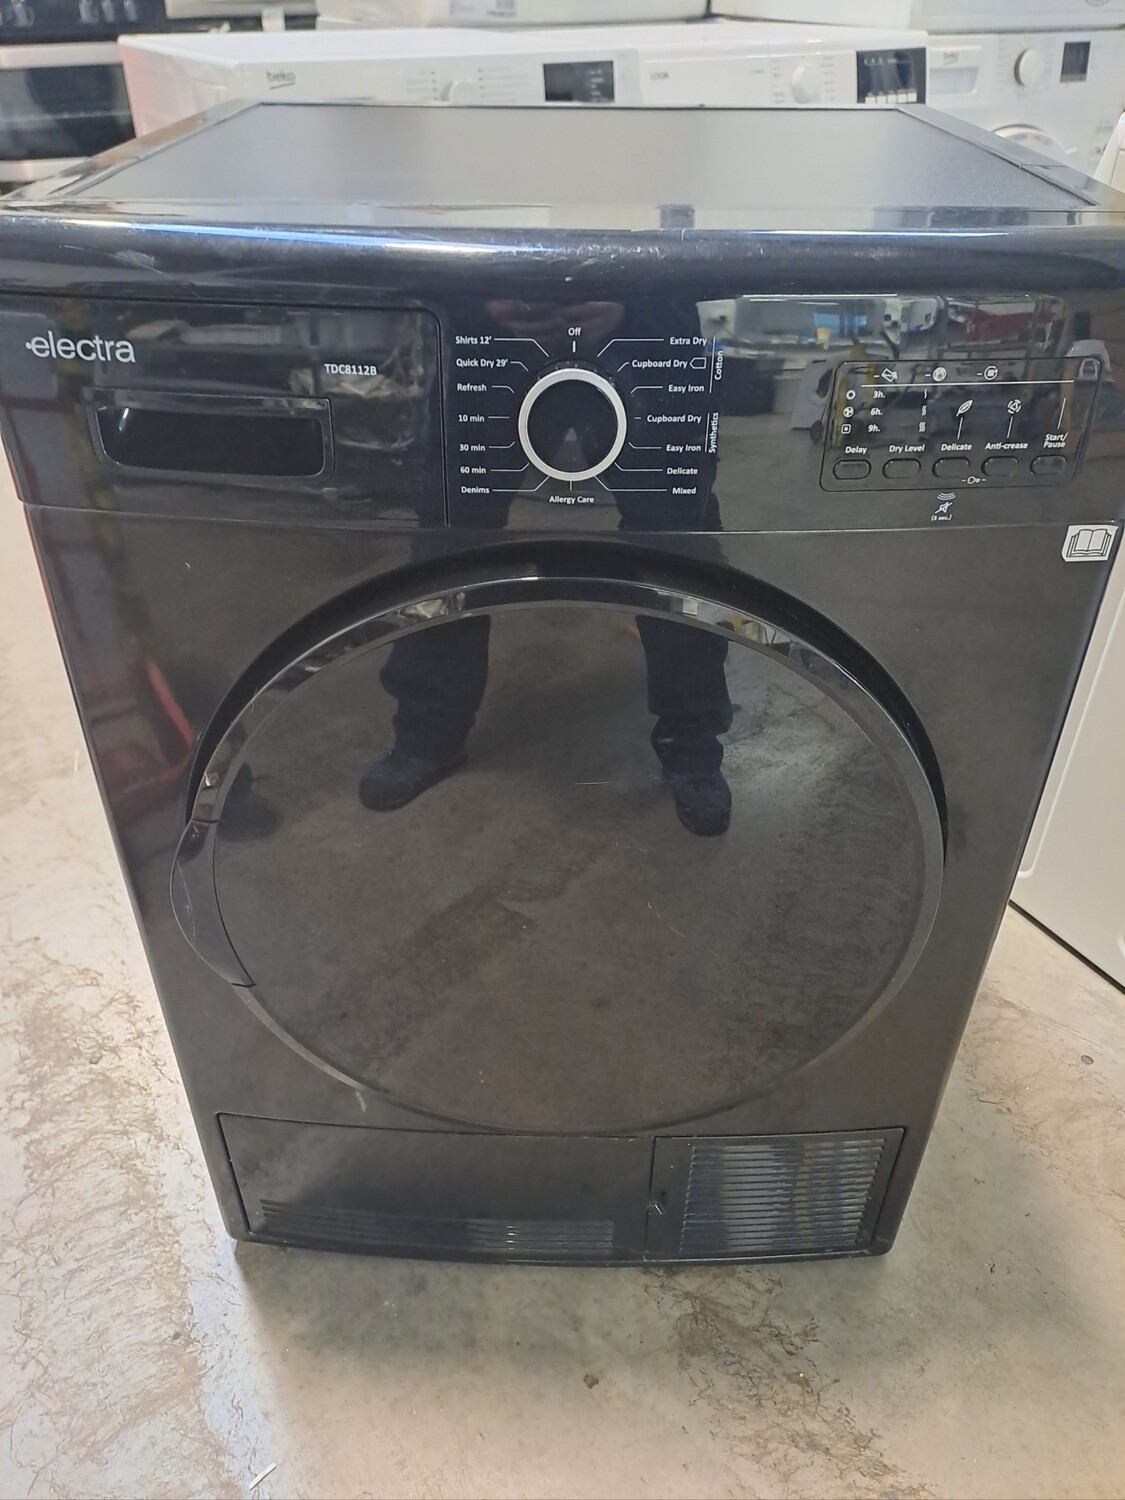 Electra TDC8112B 8Kg Condenser Dryer Black Refurbished 6 Months Guarantee. This item is located in our Whitby Road 